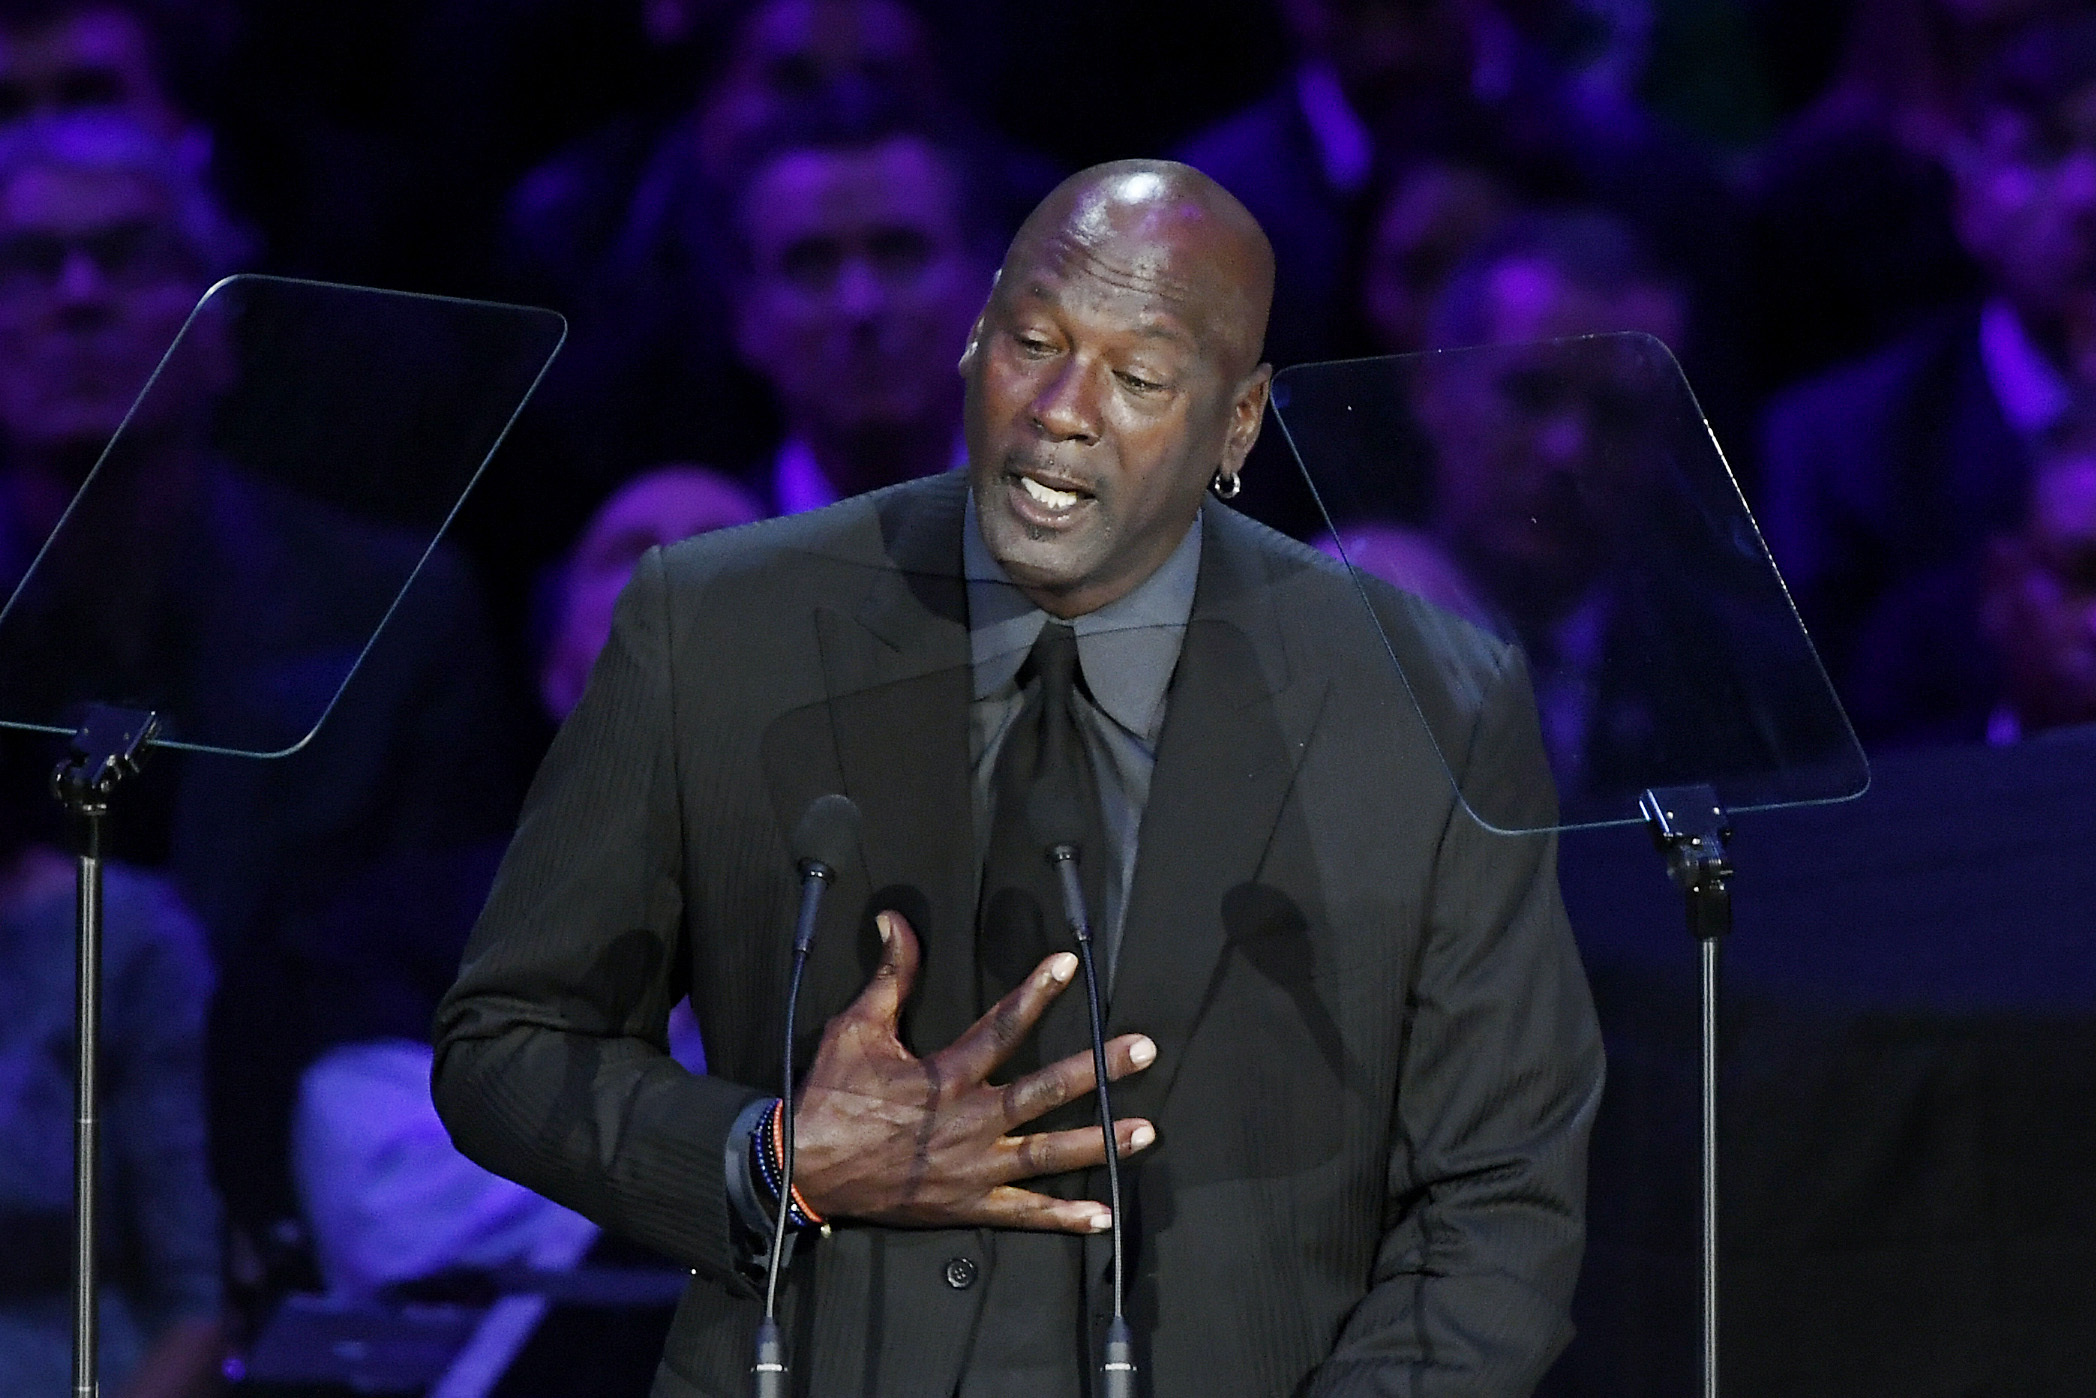 Michael Jordan on Phil Jackson, Jerry Krause and the one NBA